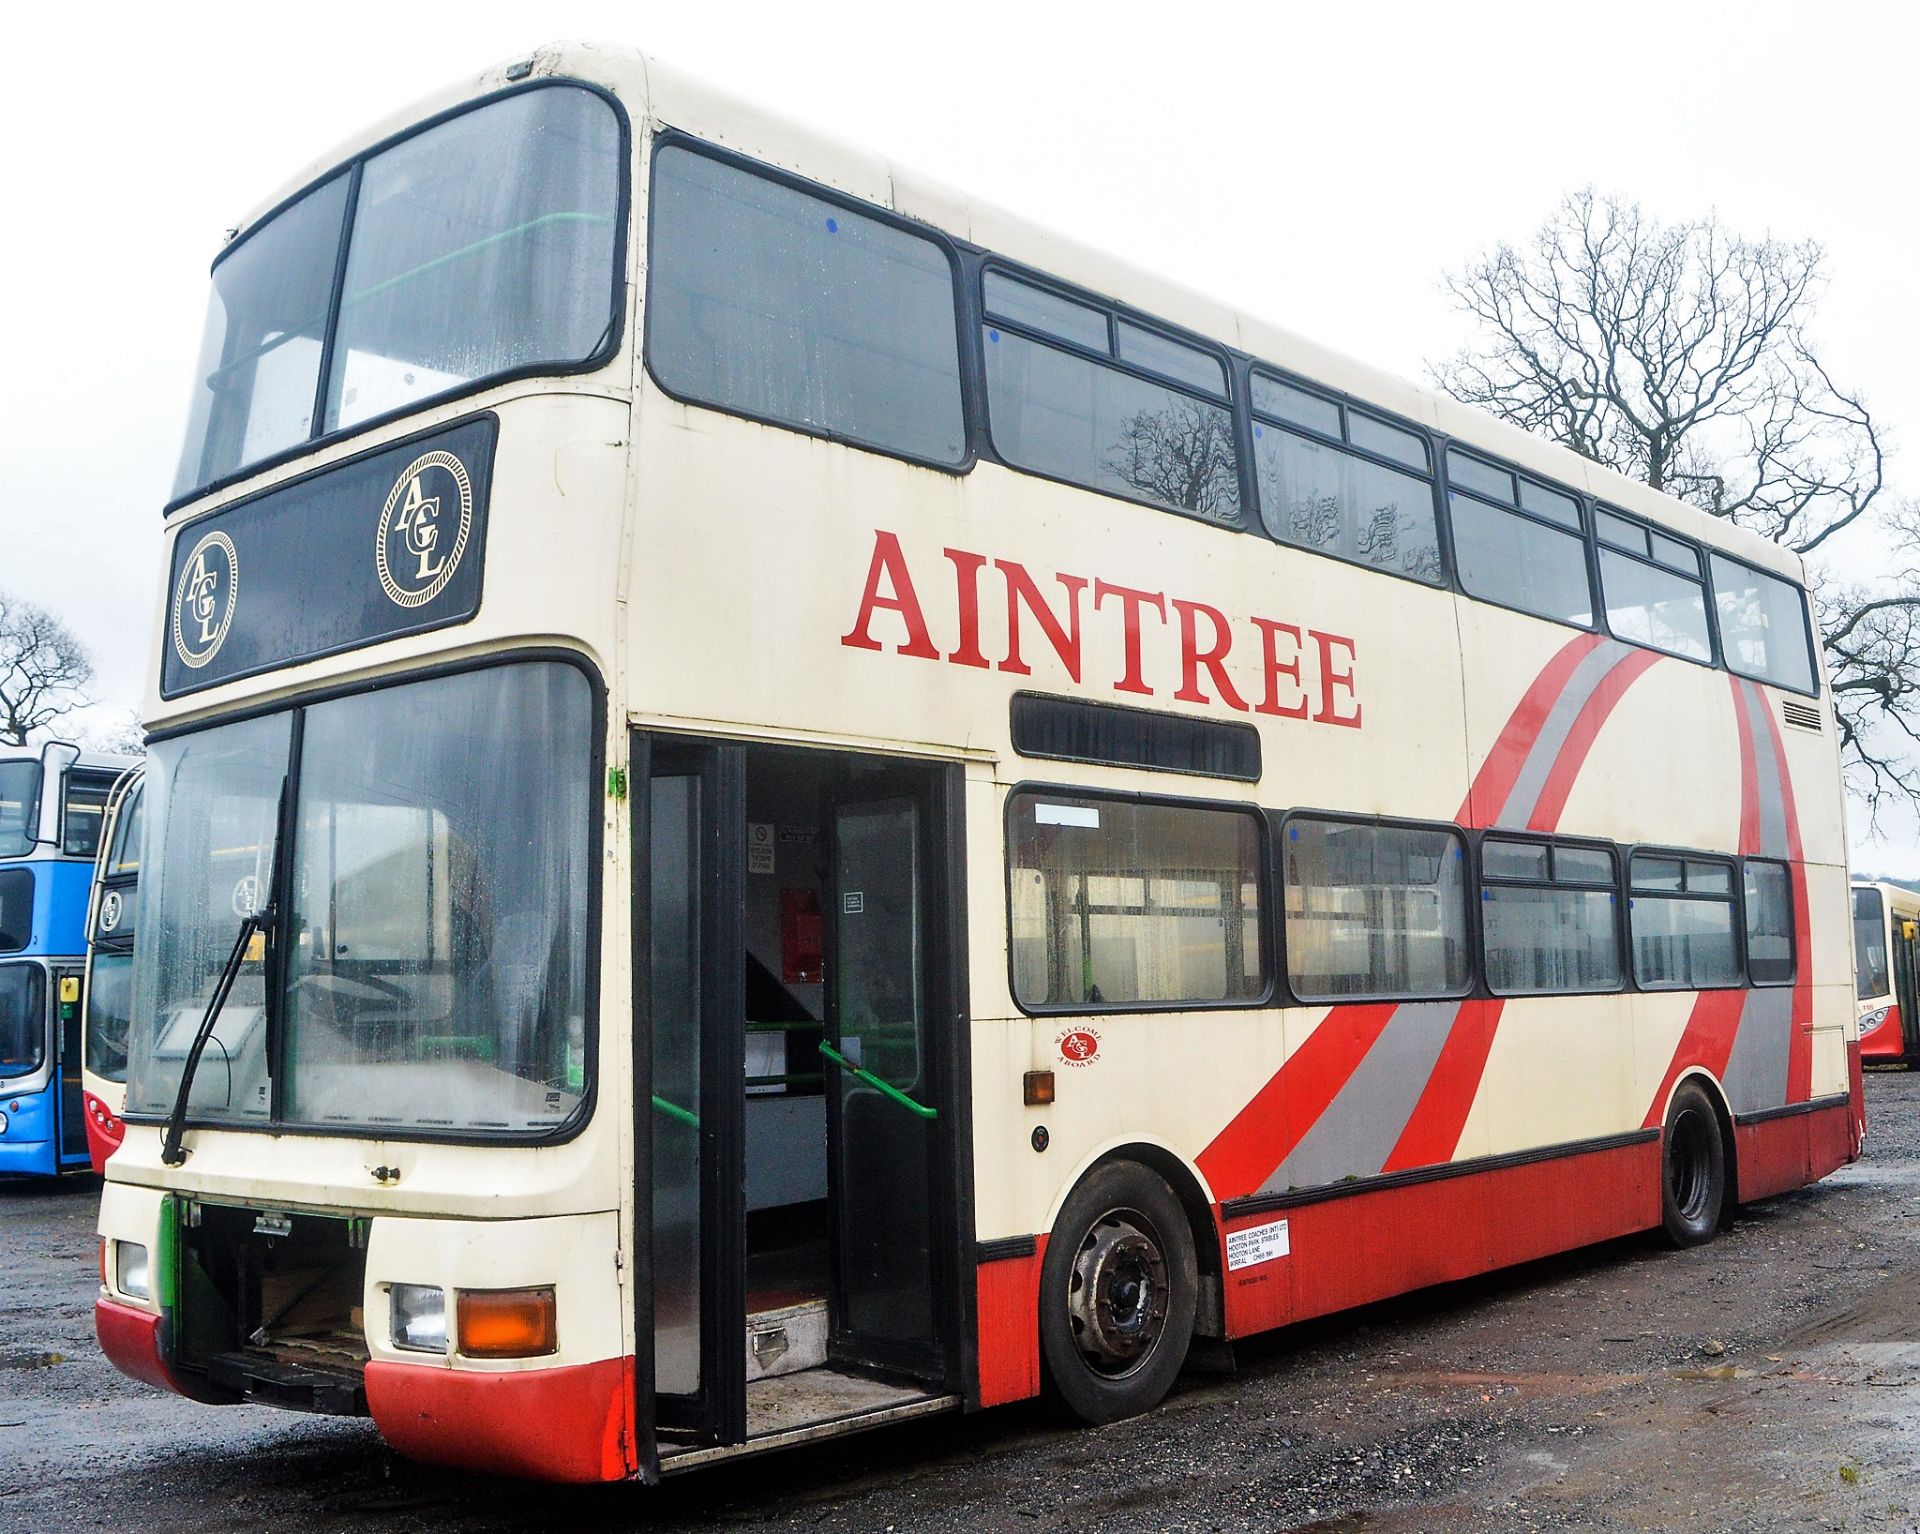 Alexander Dennis double deck service bus for spares Registration Number: P5 ACL (Plate not sold with